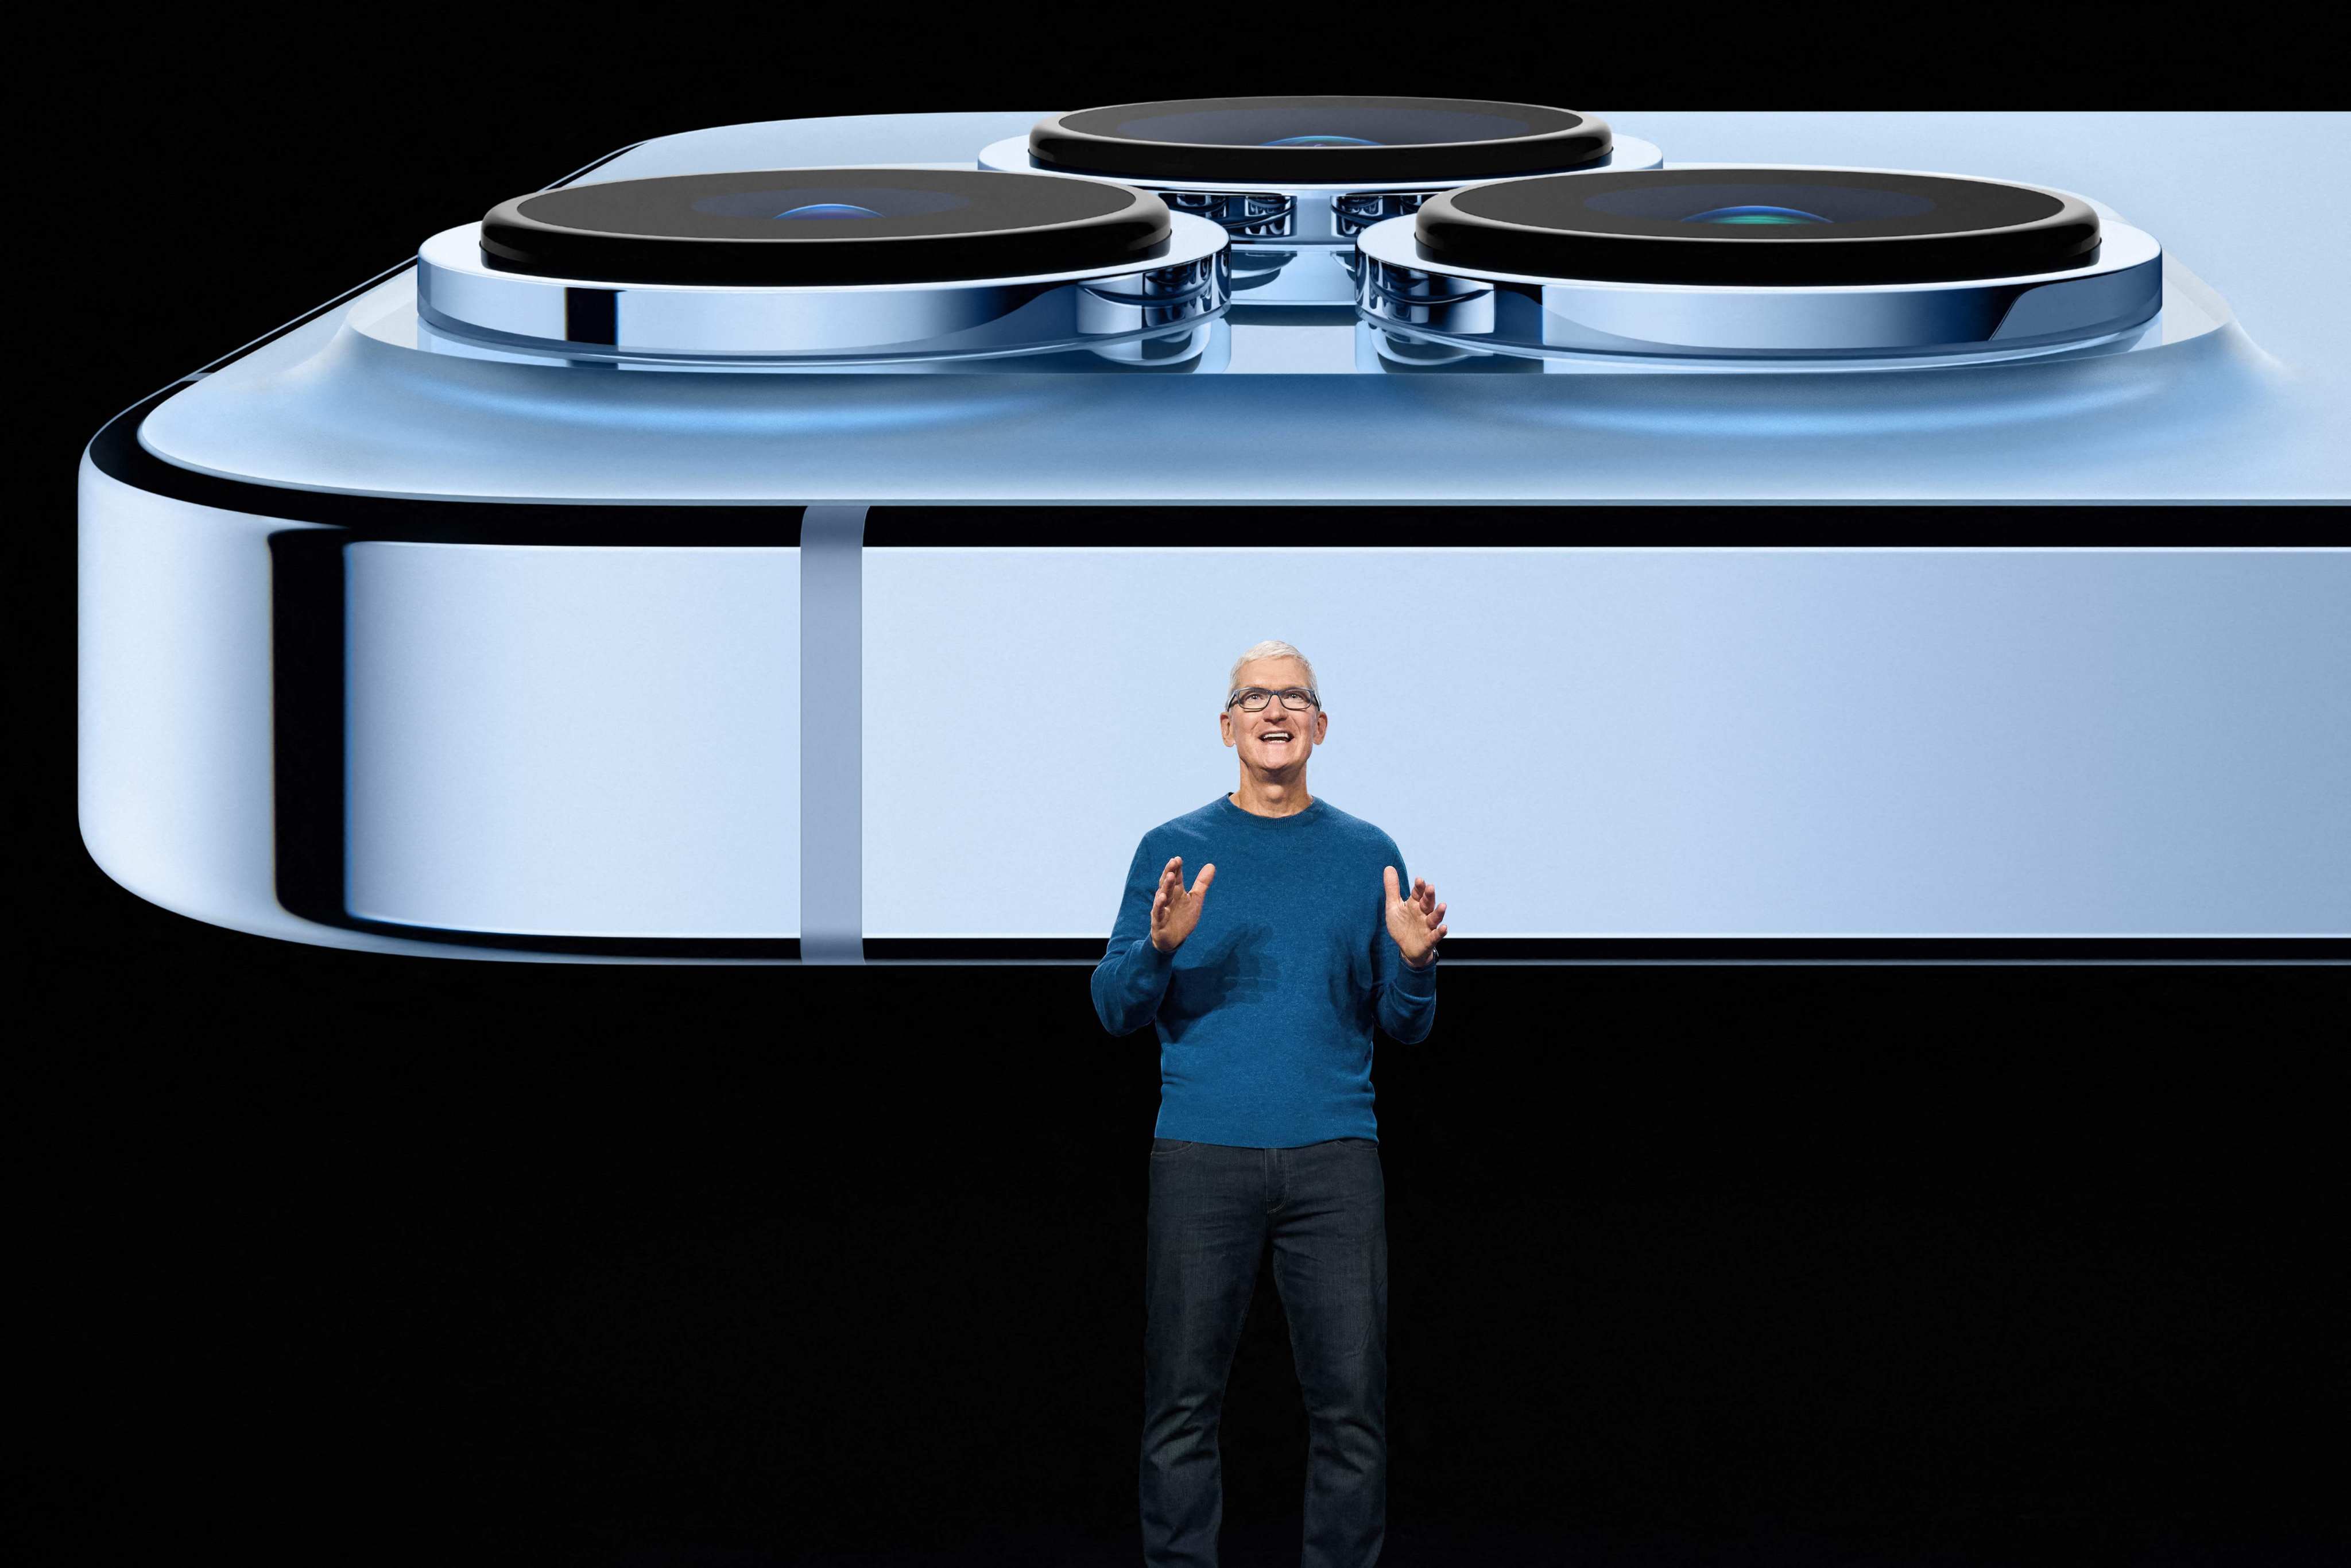 Apple CEO Tim Cook showcases the advanced camera system on the new iPhone 13 Pro in September 2021. Photo: Apple Inc/ AFP